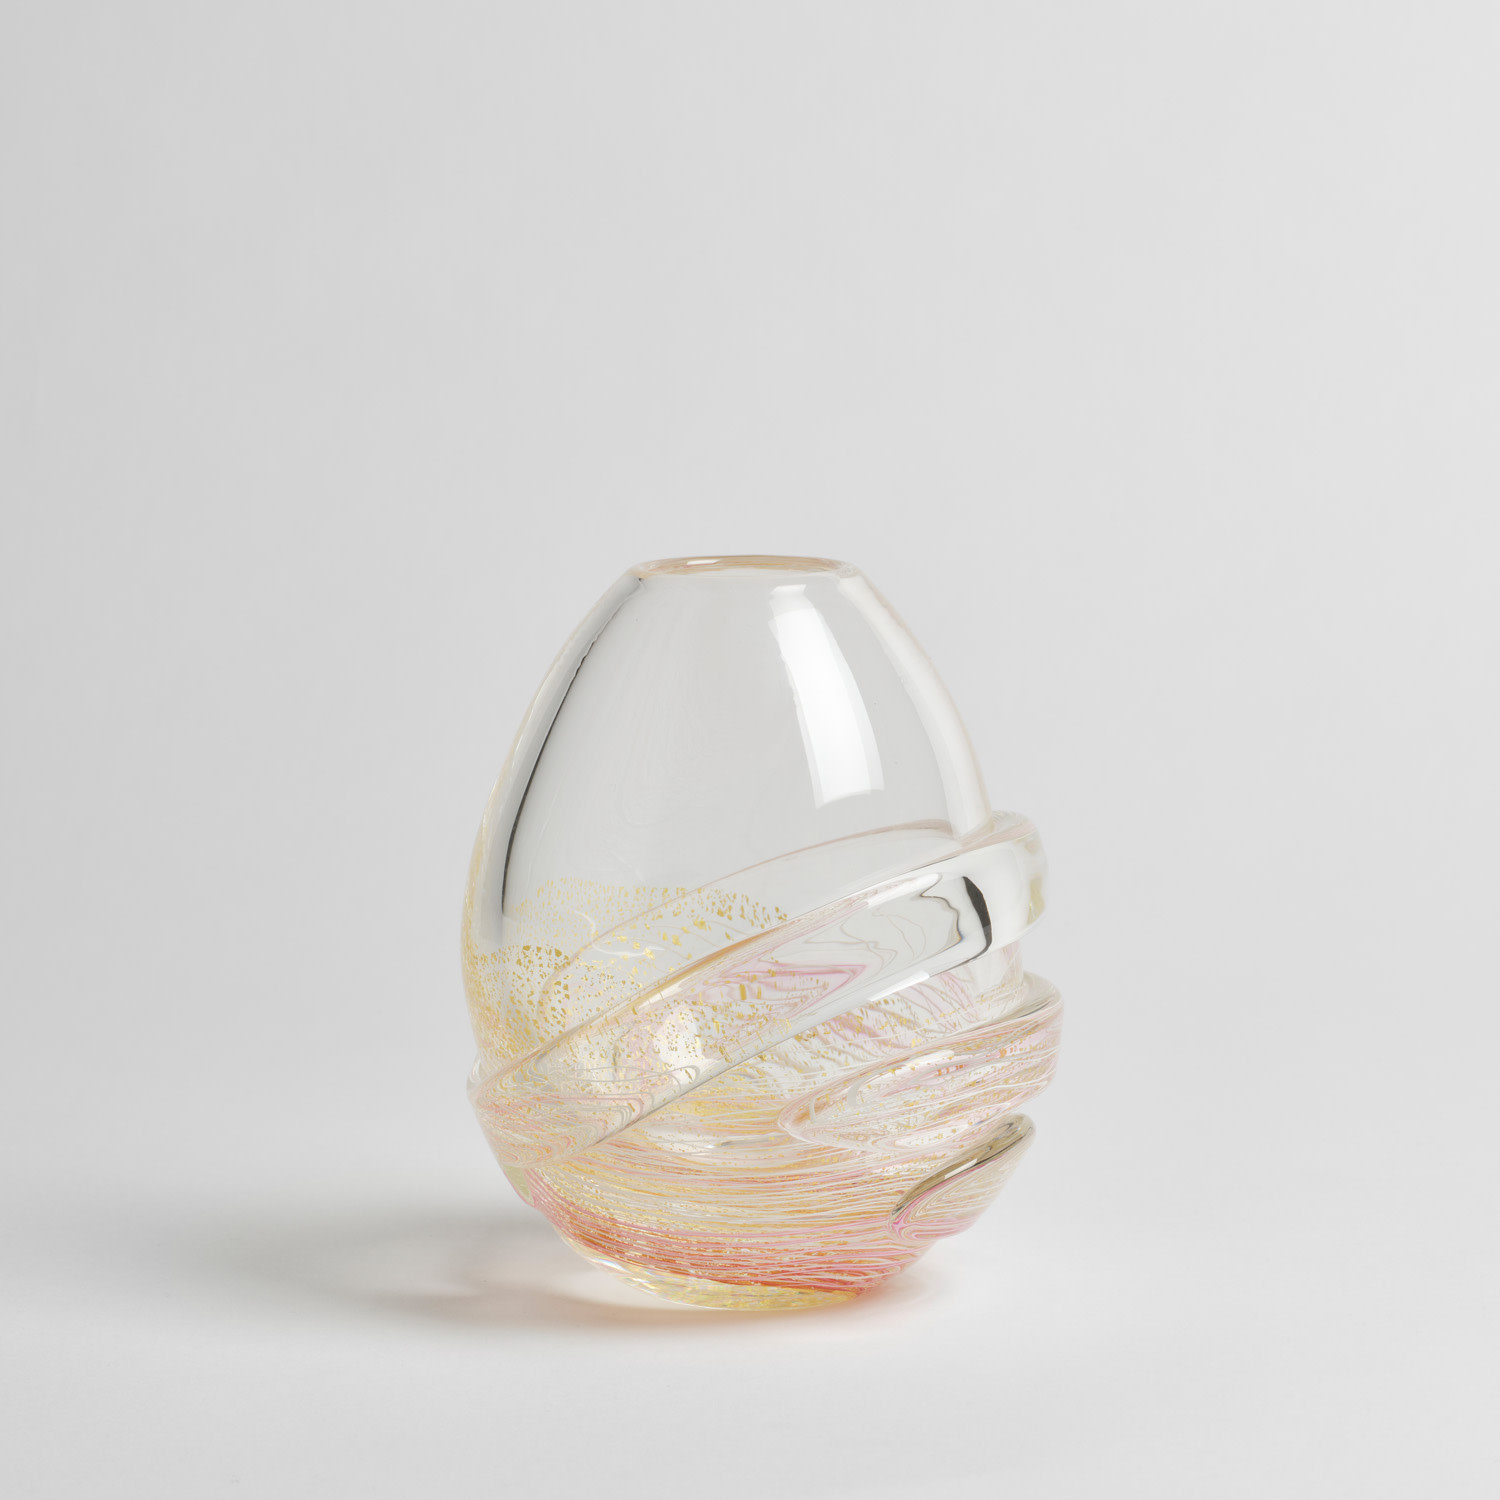 Alexandra Kidd Atelier - Mirabella Bud Vase - Polished Glass Clear with Rosalin and White Canework, Gold Dust - Handcrafted in Australia-1